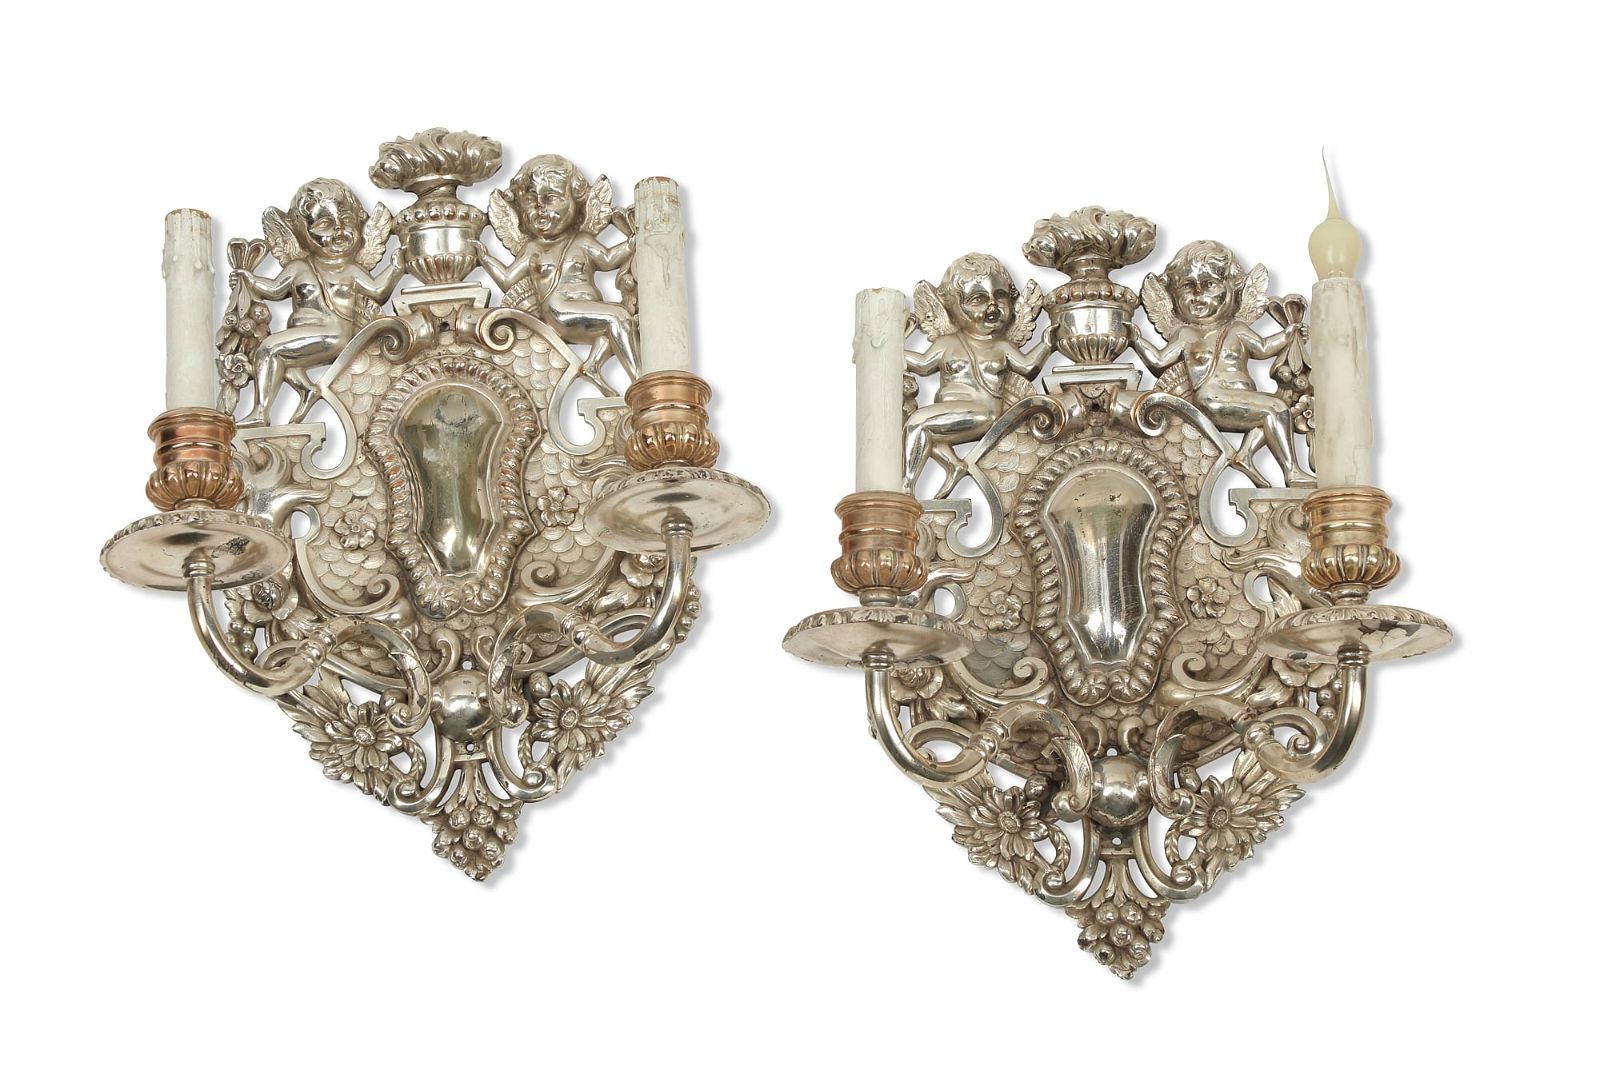 A PAIR OF CONTINENTAL BAROQUE STYLE